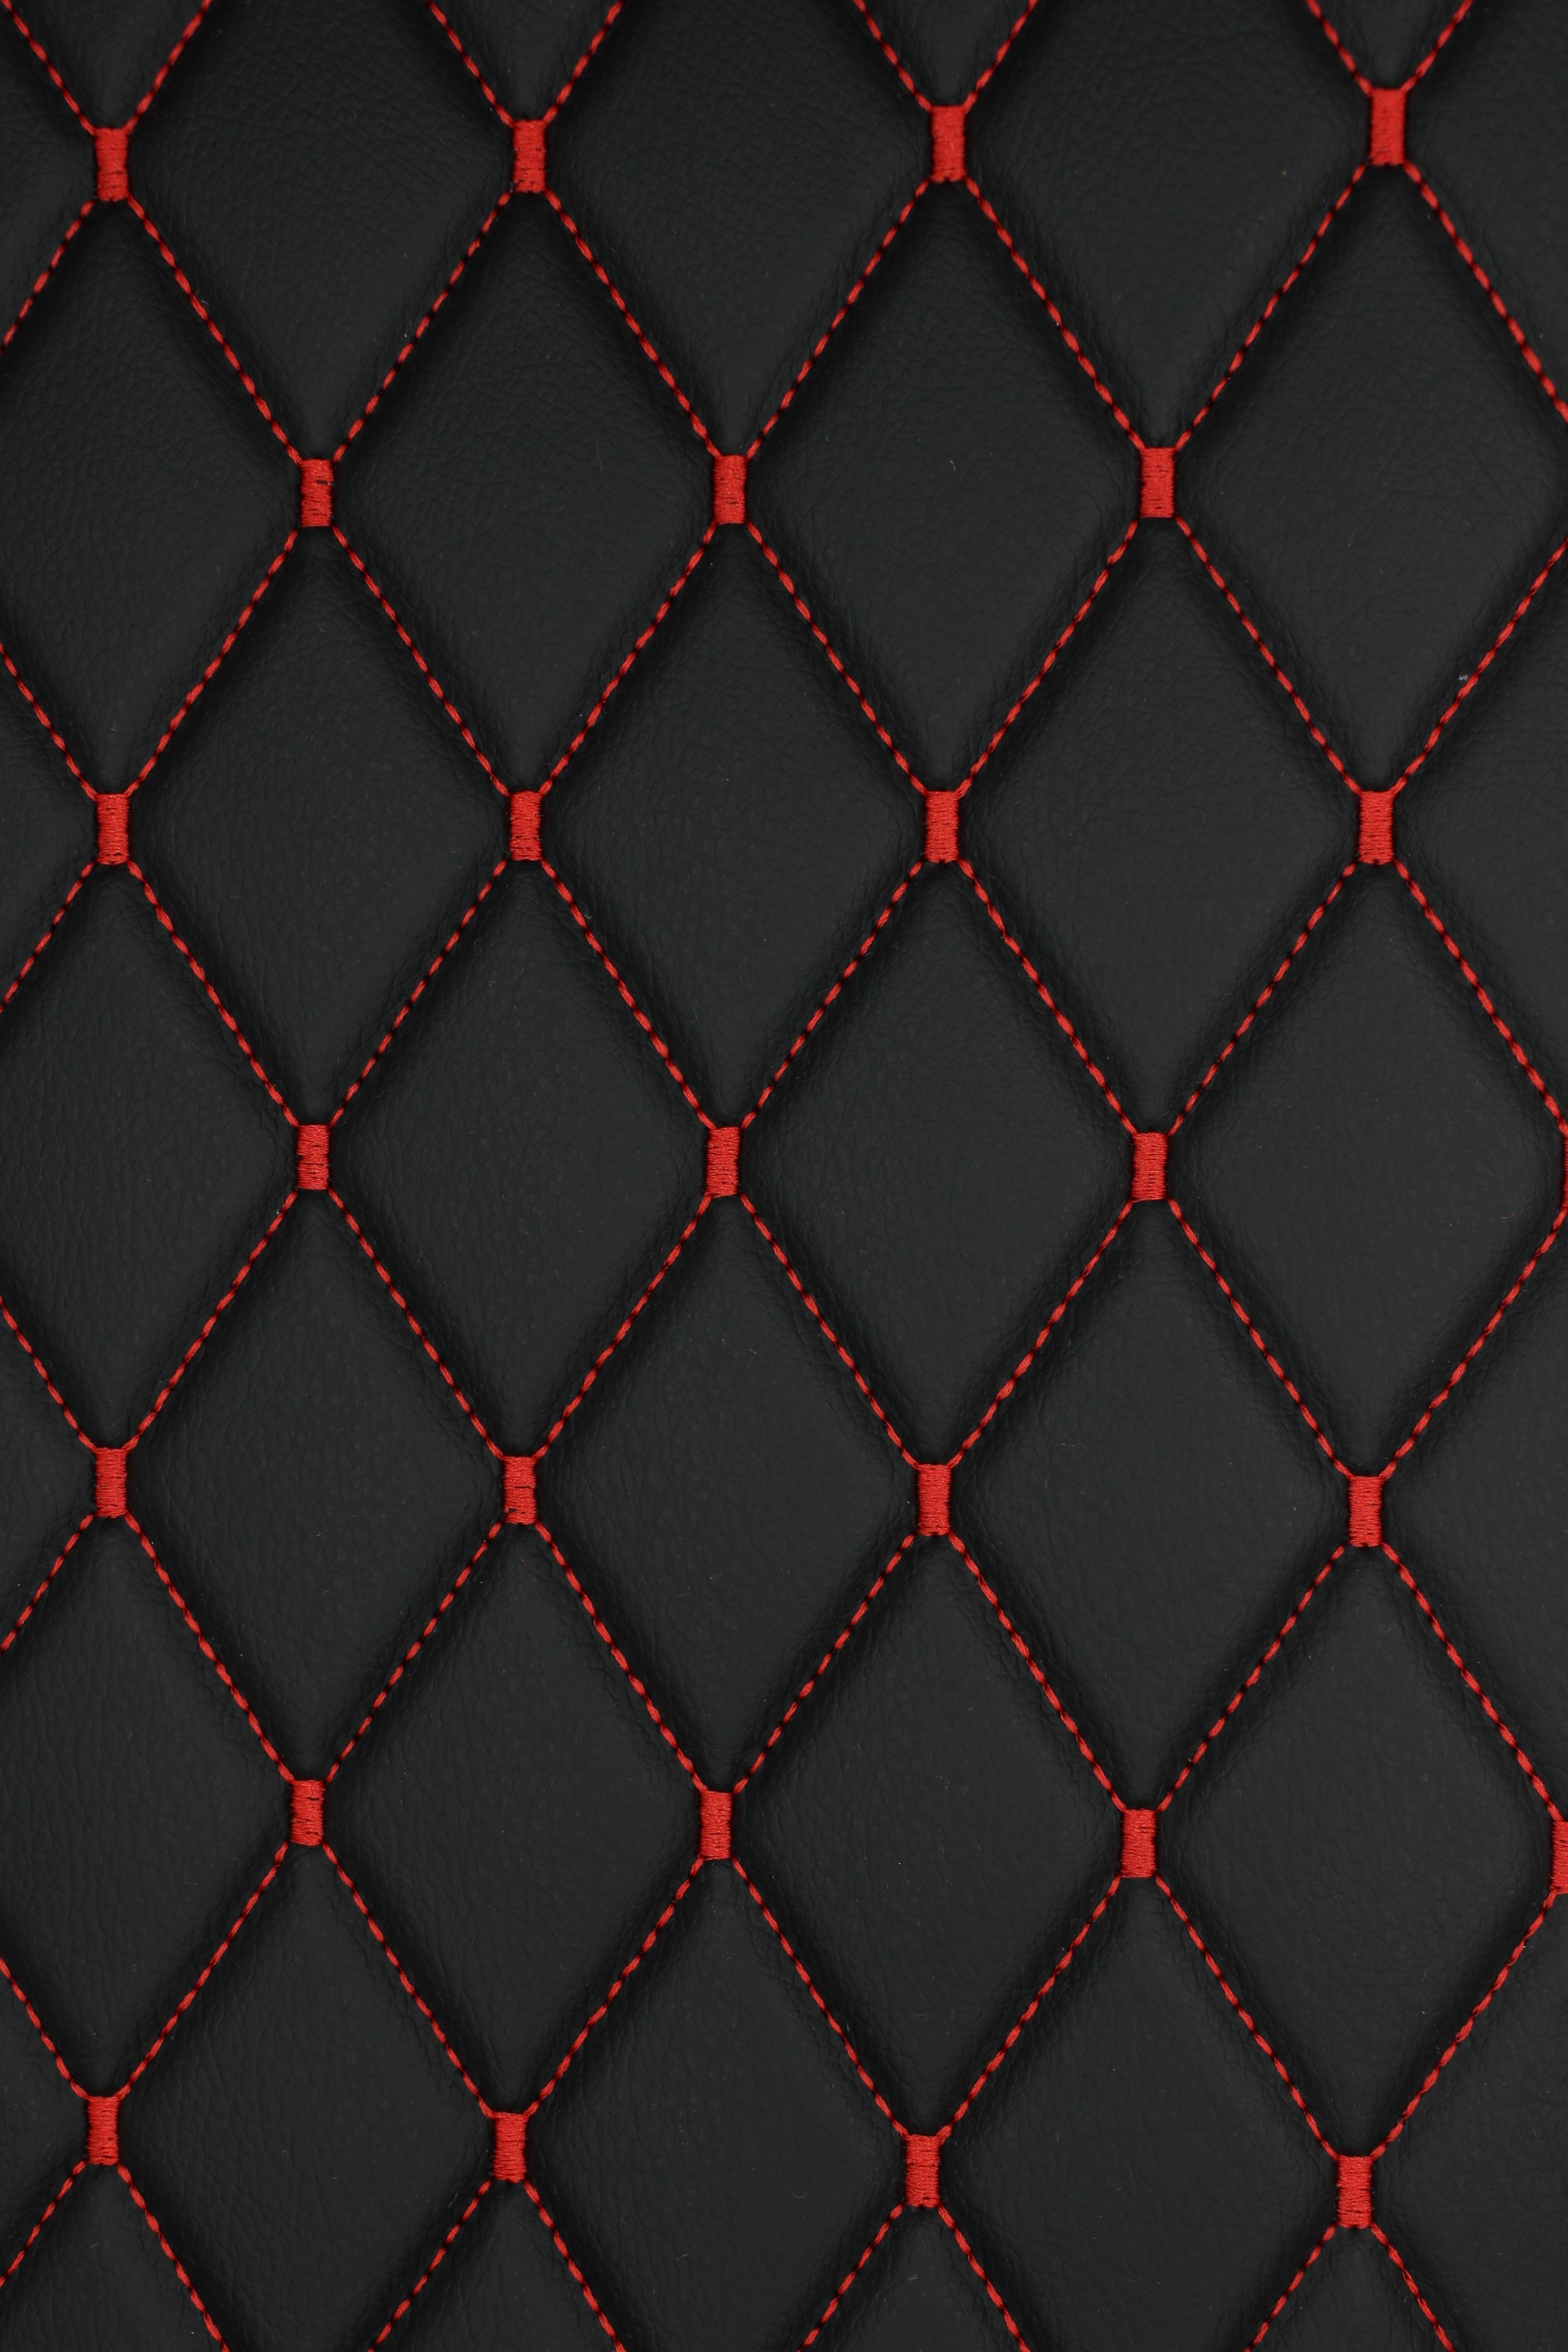 Red Quilted Black Vinyl Grain Faux Leather Car Upholstery Fabric | 2"x3" - 5x8cm Diamond Stitch with Foam | 140cm & 55.1" Wide | Artificial Leather